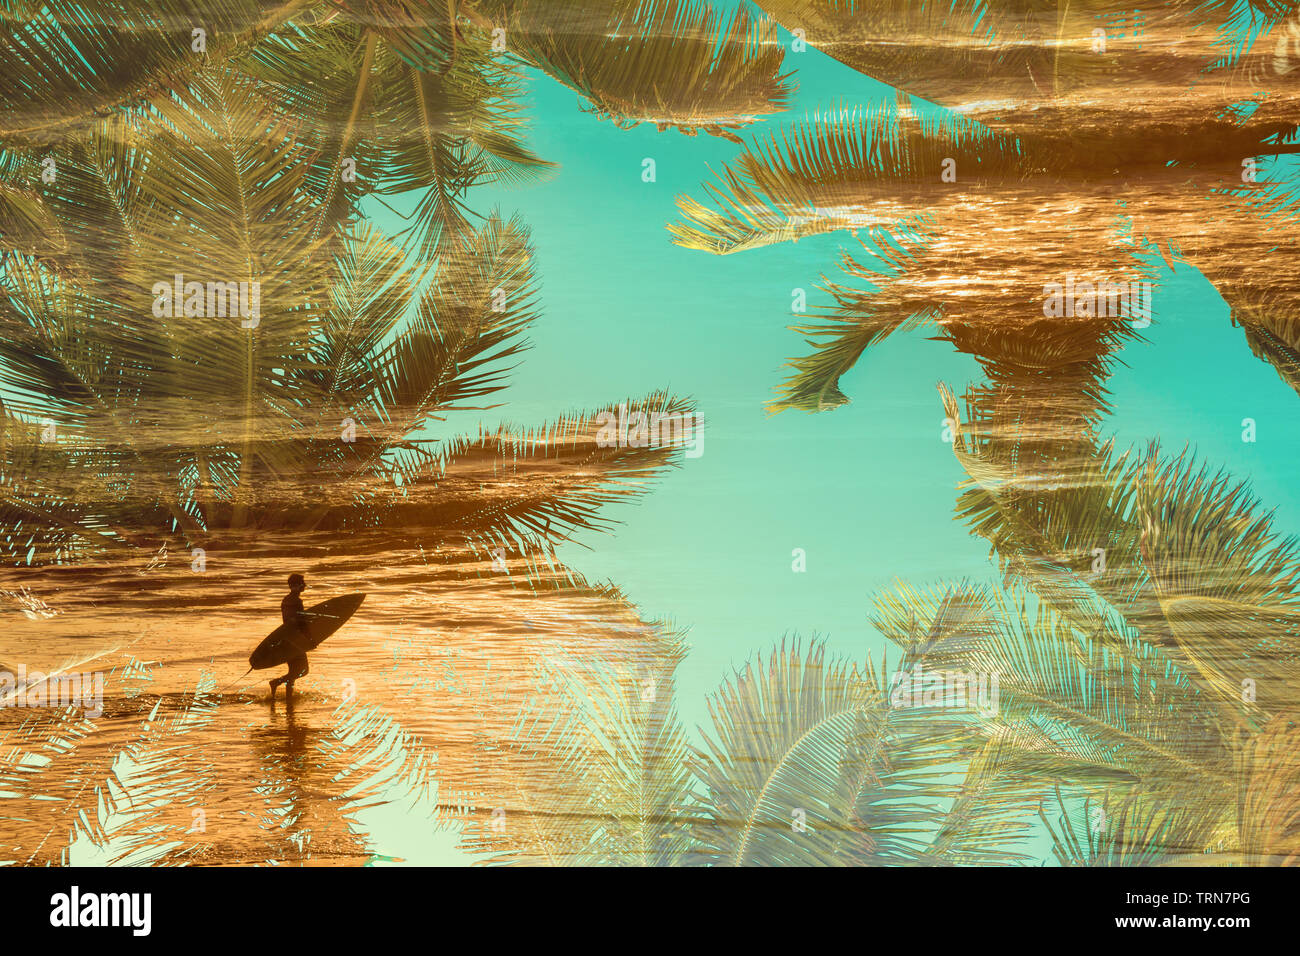 Silhouette of a surfer at sunset, double exposure photography with palm trees Stock Photo